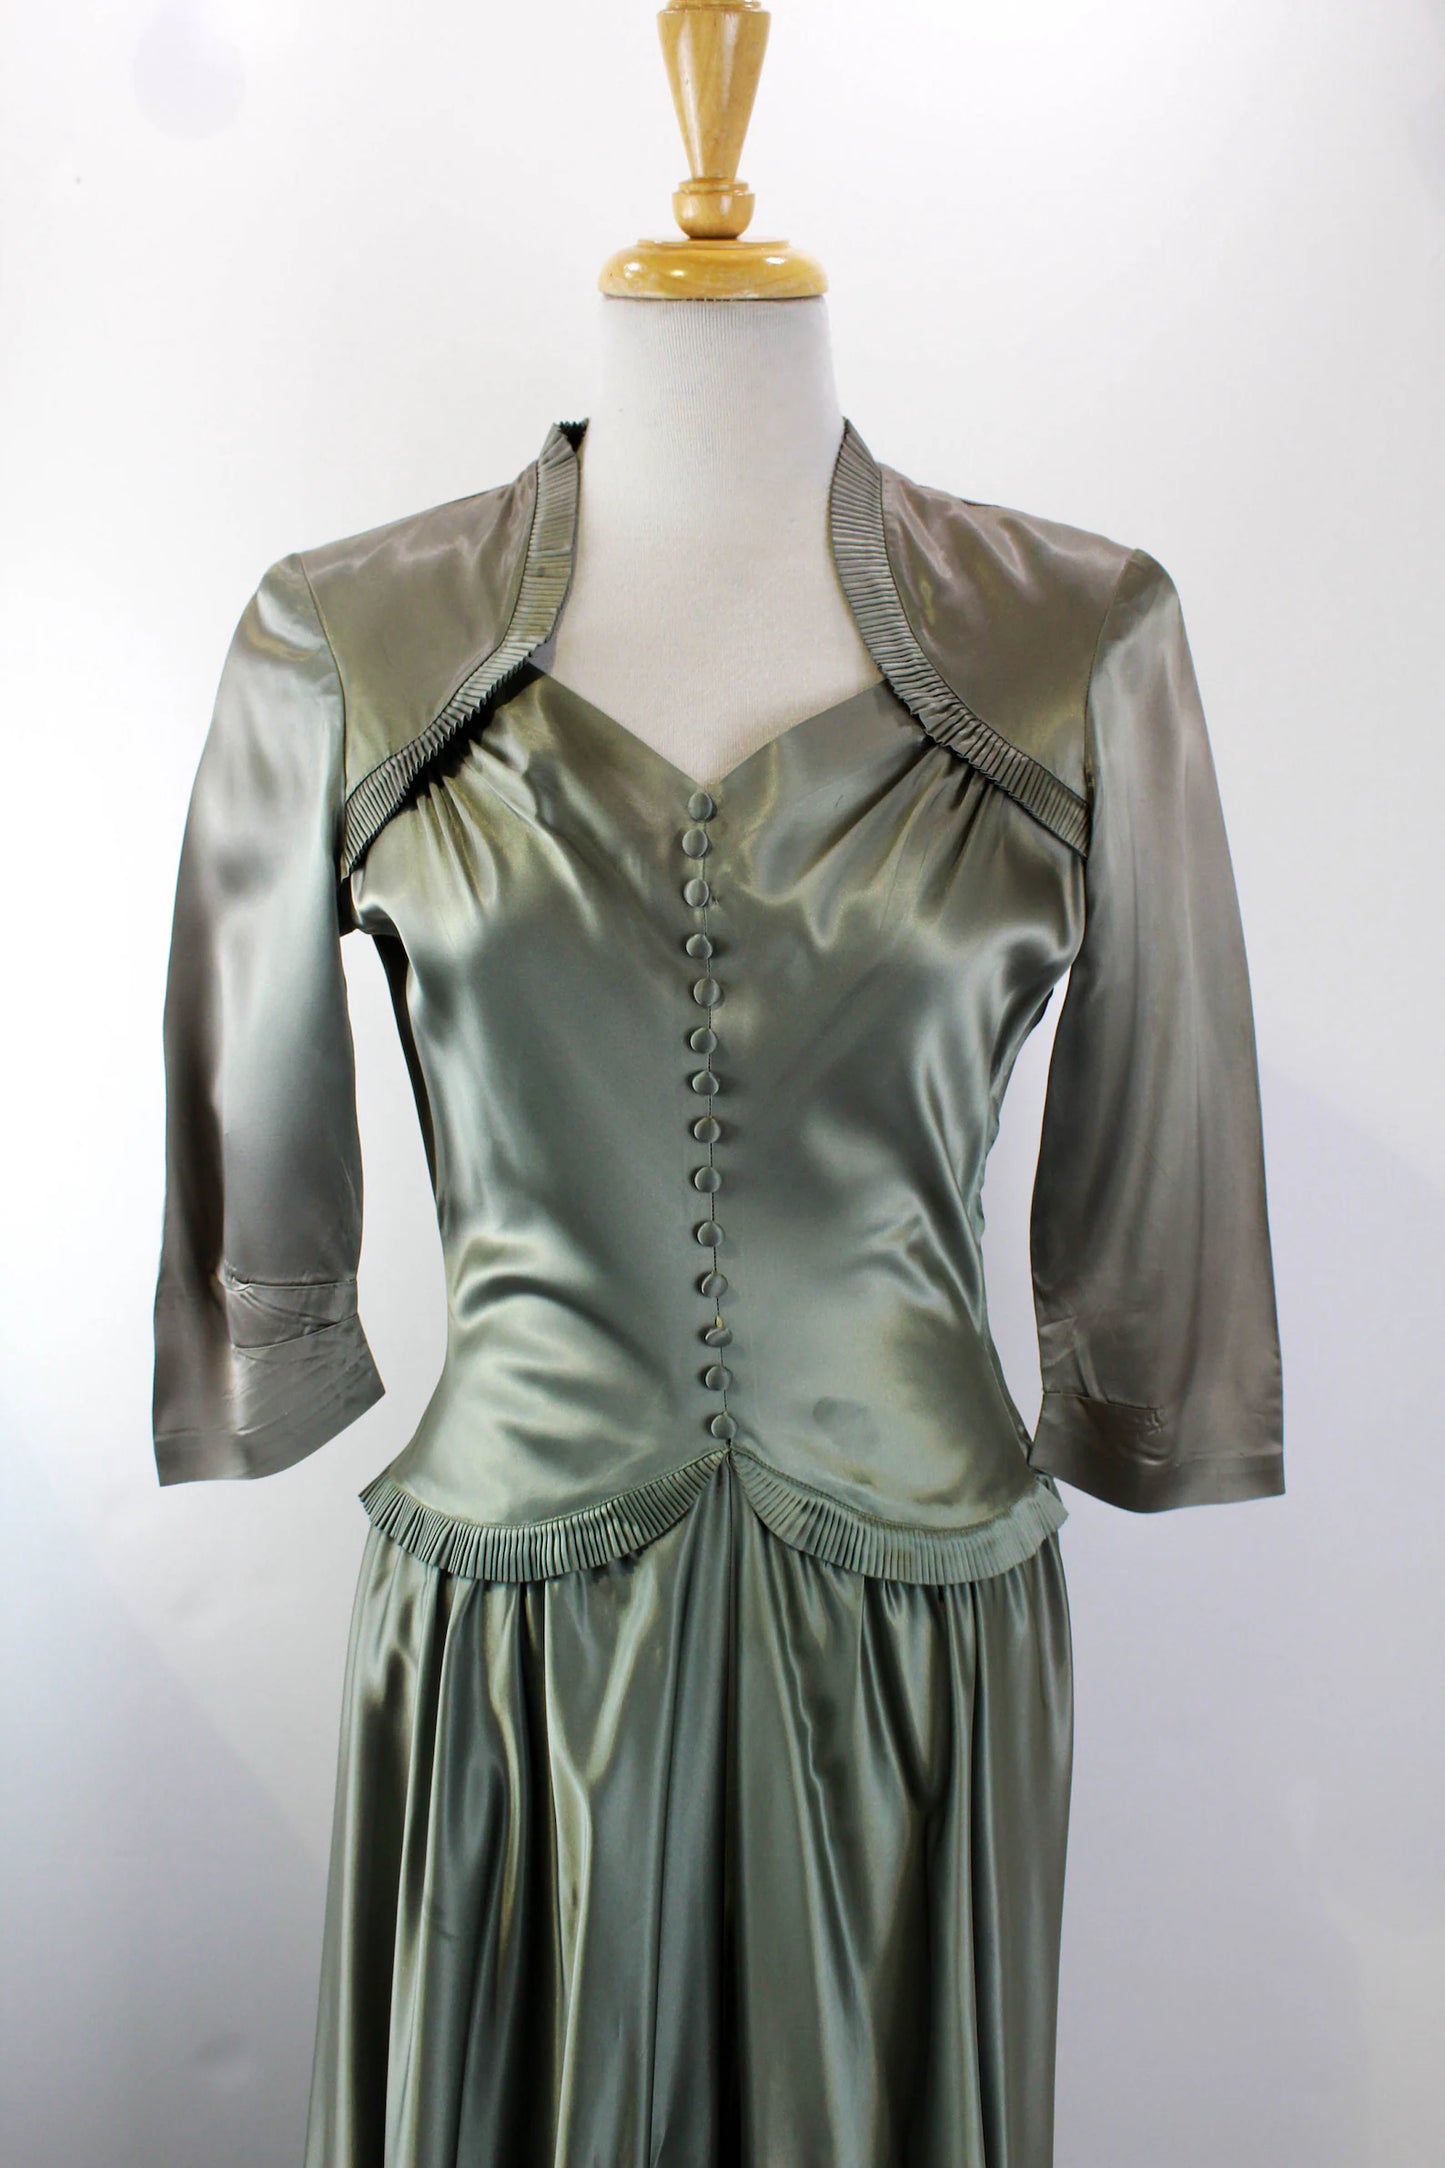 1940s Green Satin Gown, Full Skirt, Pleated Trim, Vintage 40s Dress, Covered Buttons, Maxi Length, 3/4 Sleeves, Bust 34